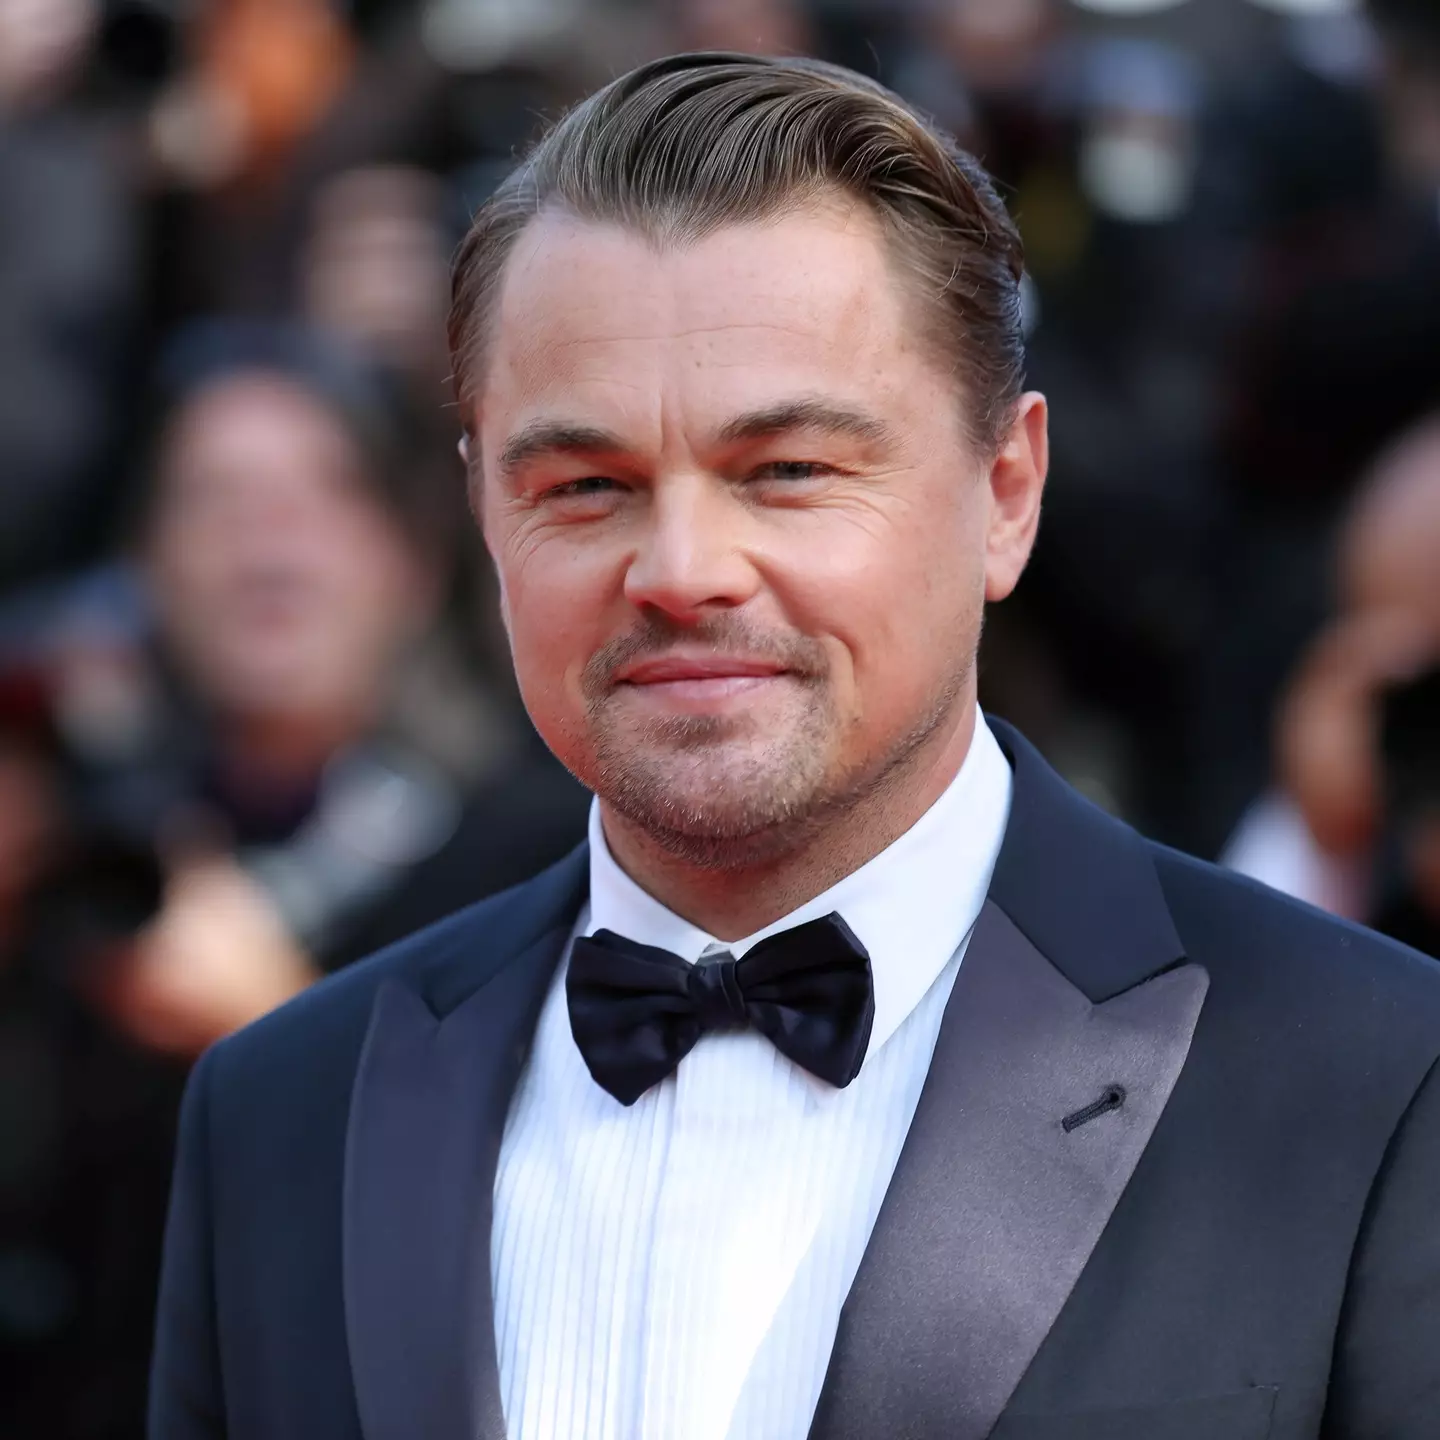 DiCaprio was allegedly good friends with the fraudster.